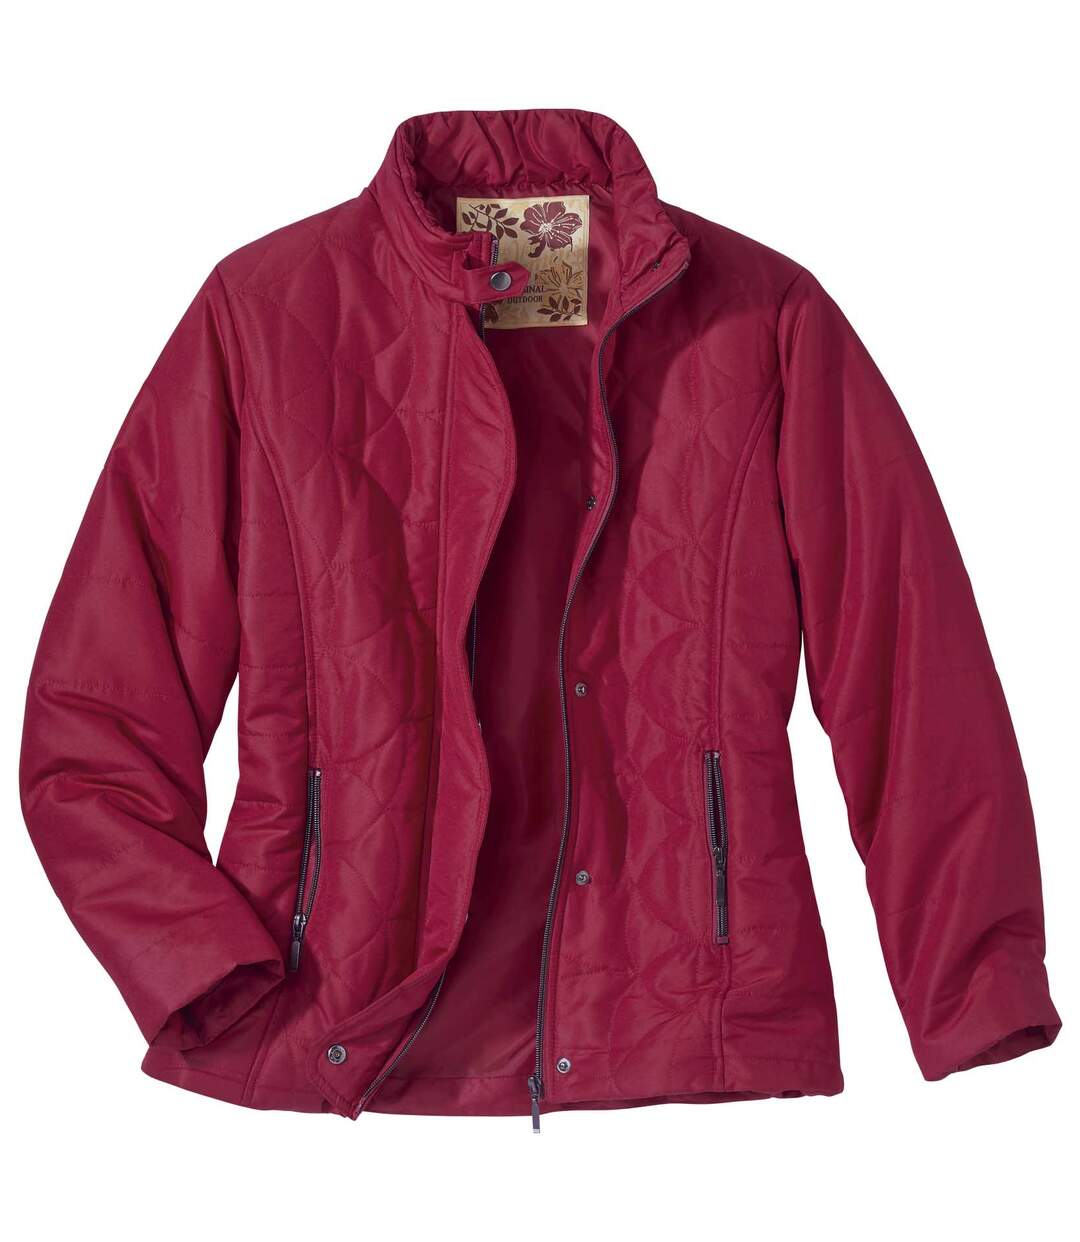 Women’s Vibrant Red Quilted Jacket Atlas For Men